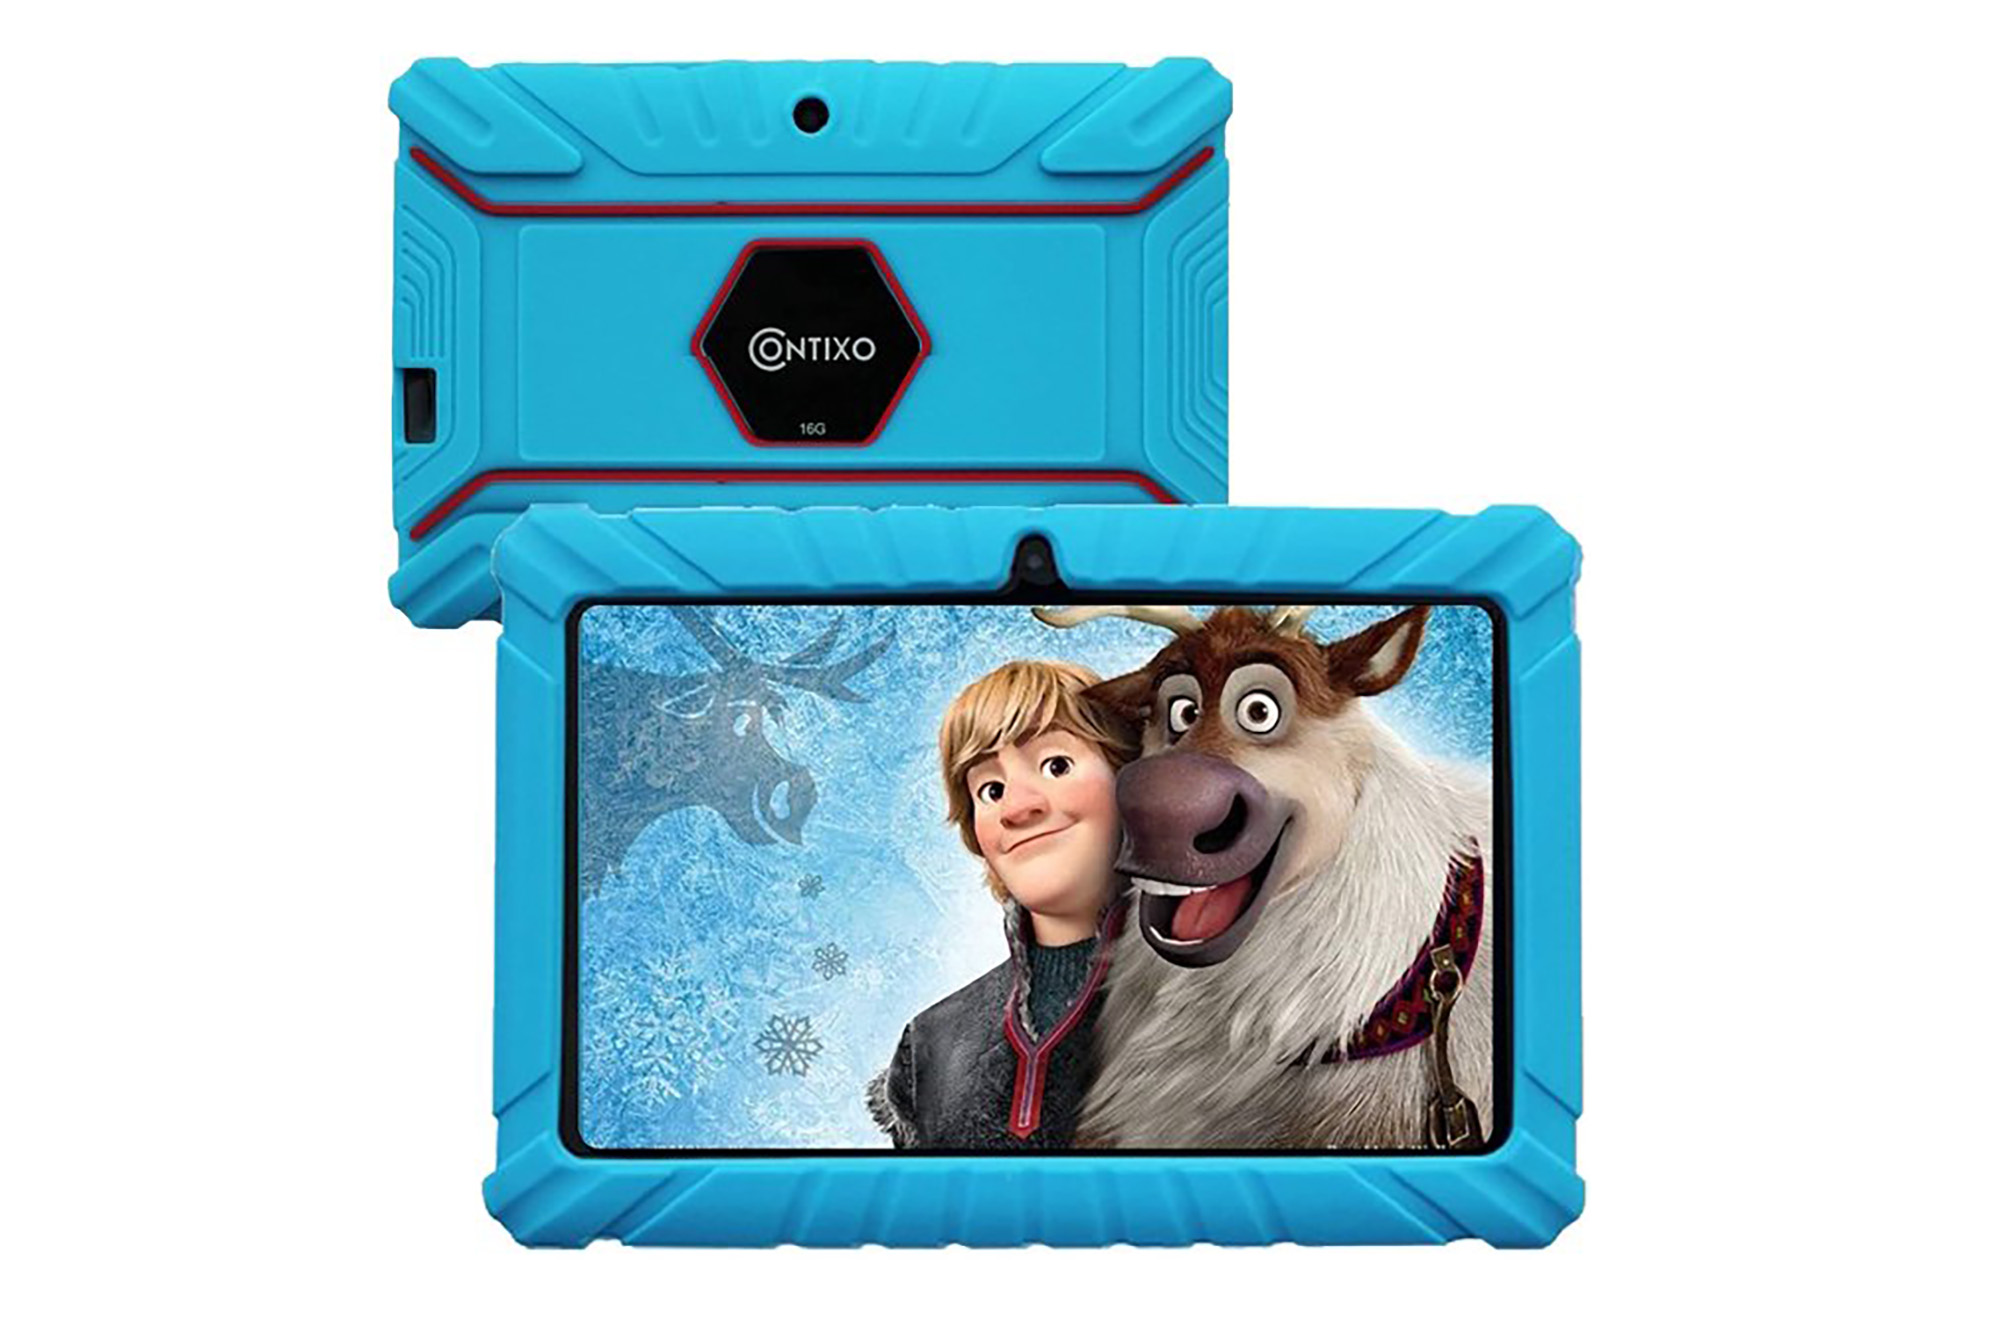 A kid's blue tablet showing characters from Frozen 